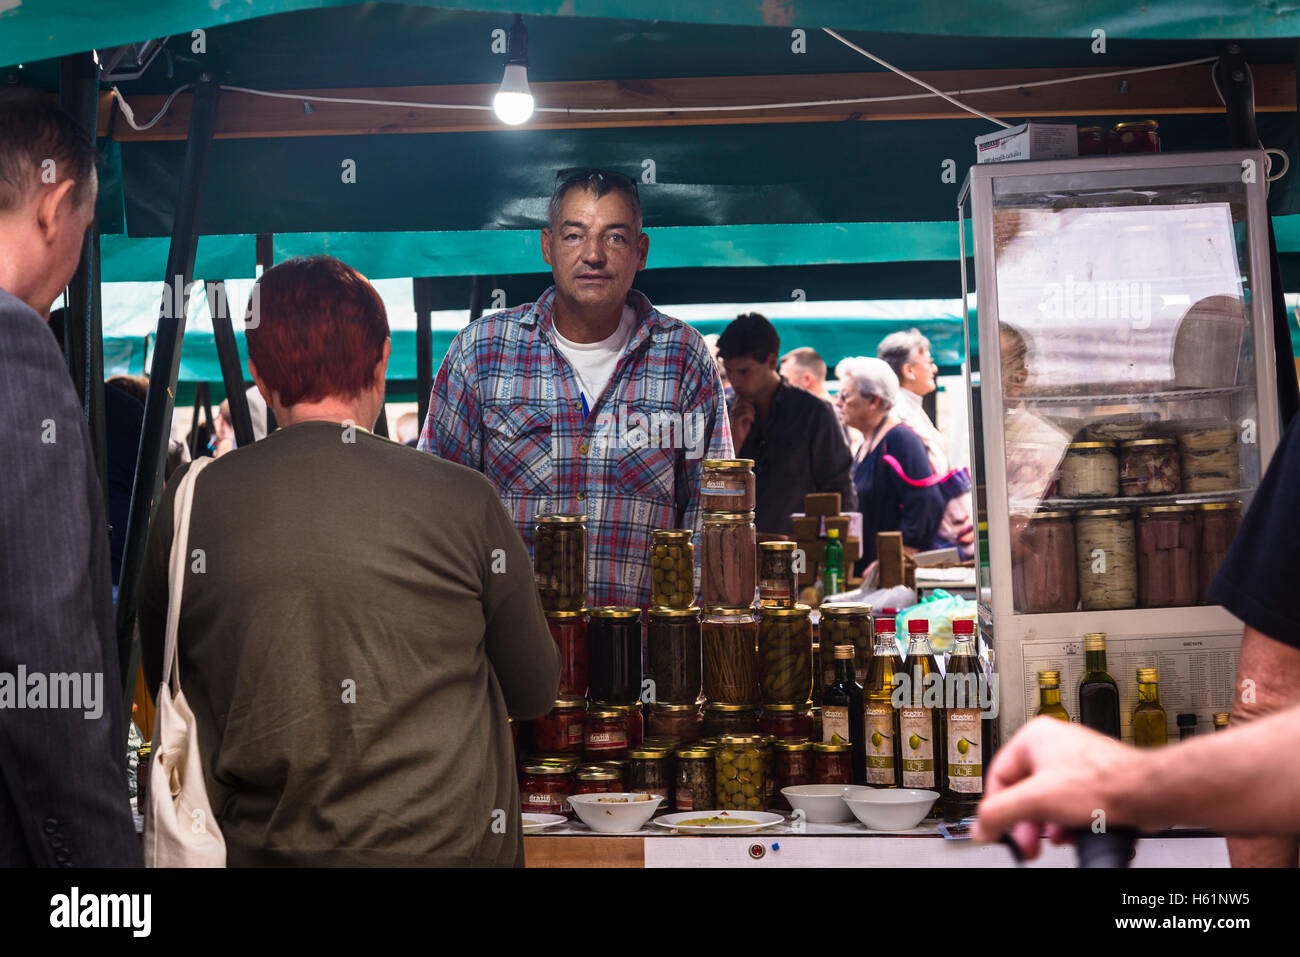 Stall with olive oil and olives, Producers' artisan market, Ban Jelacic Square, Zagreb, Croatia Stock Photo